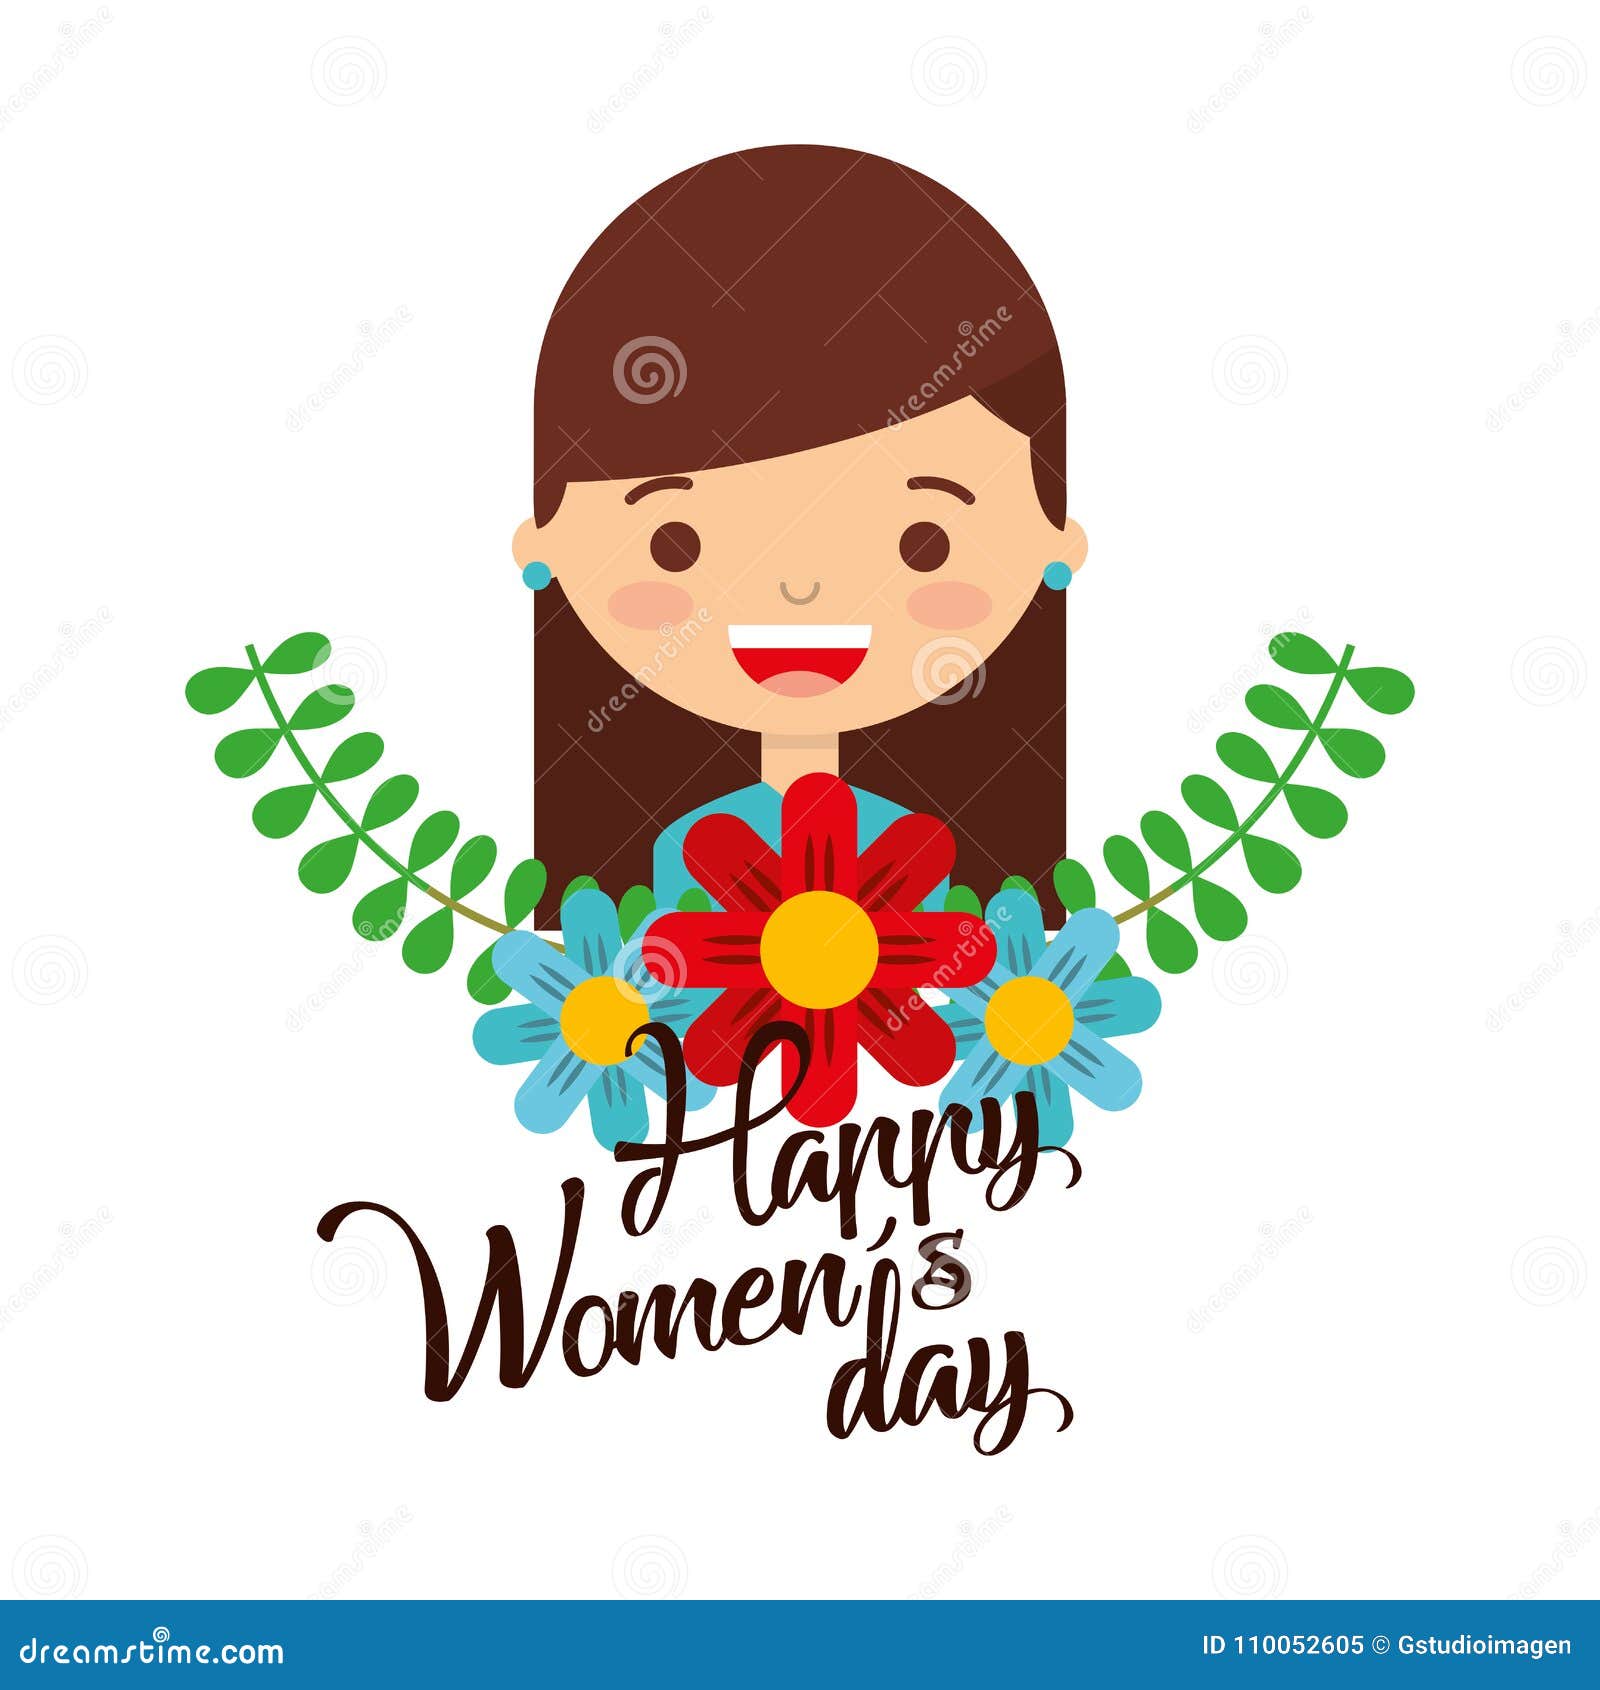 Happy Womens Day Design with Cute Stock Vector - Illustration of ...